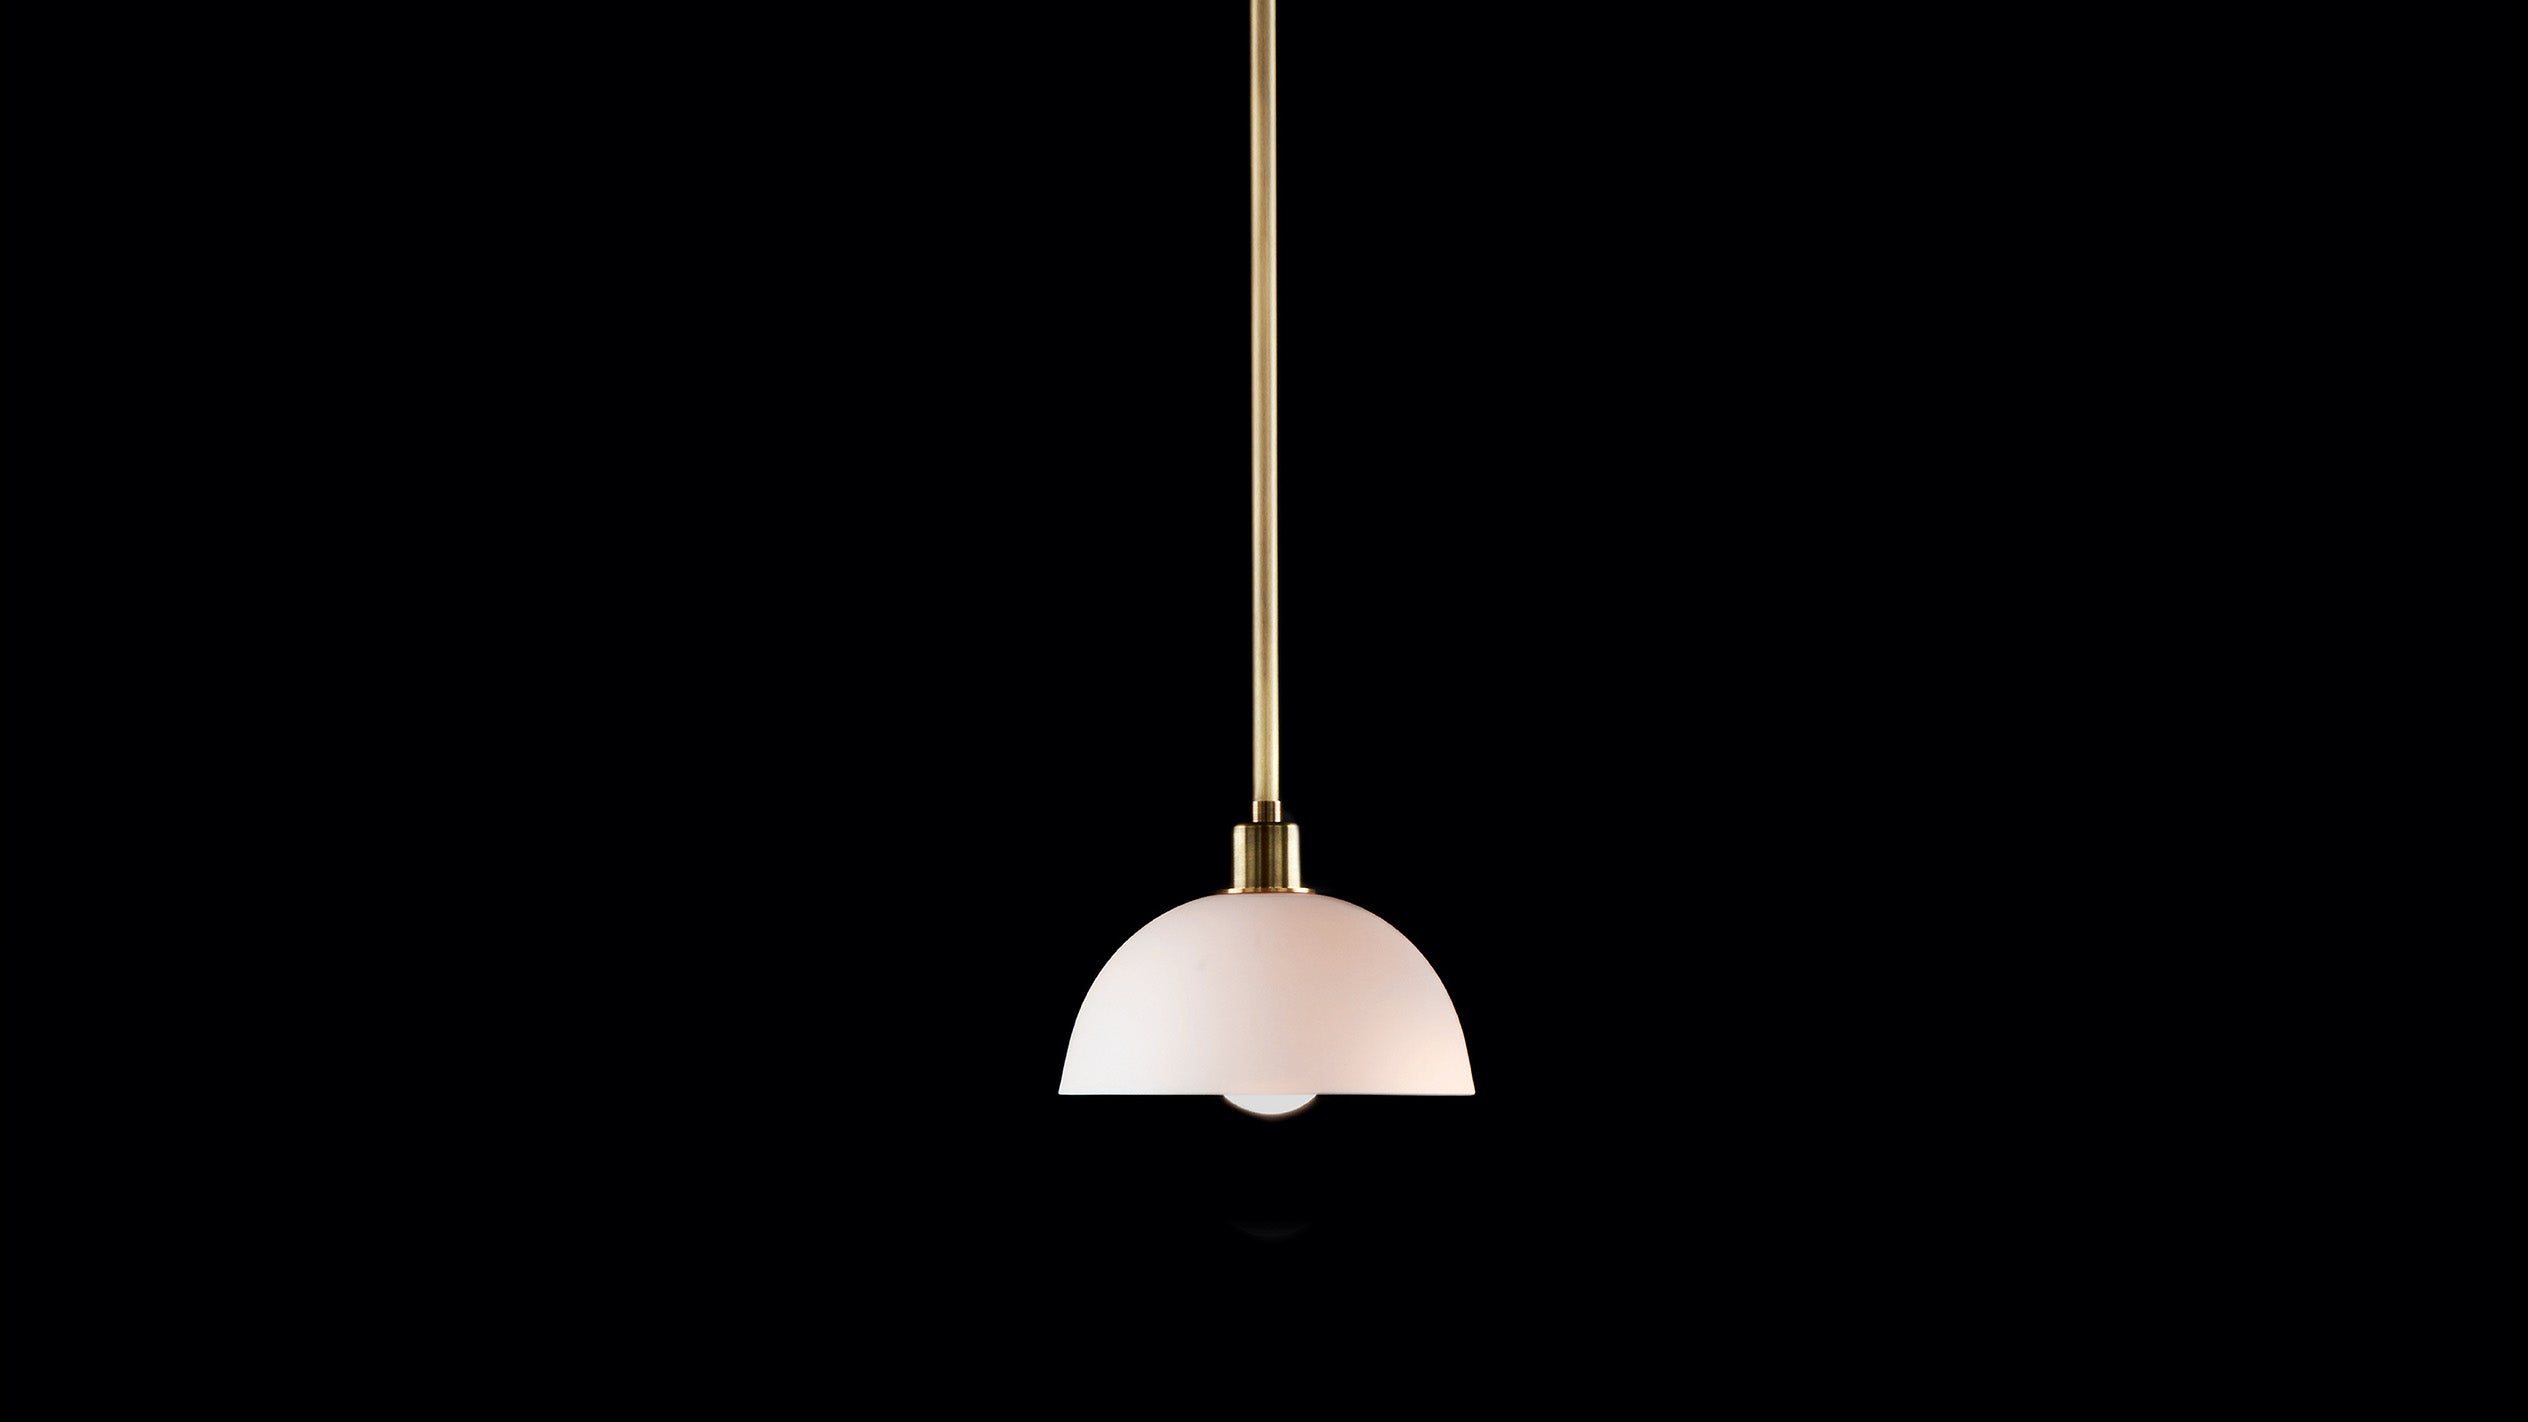 TRAPEZE : 1 ceiling pendant in Aged Brass with a Porcelain bowl, hanging against a black background. 